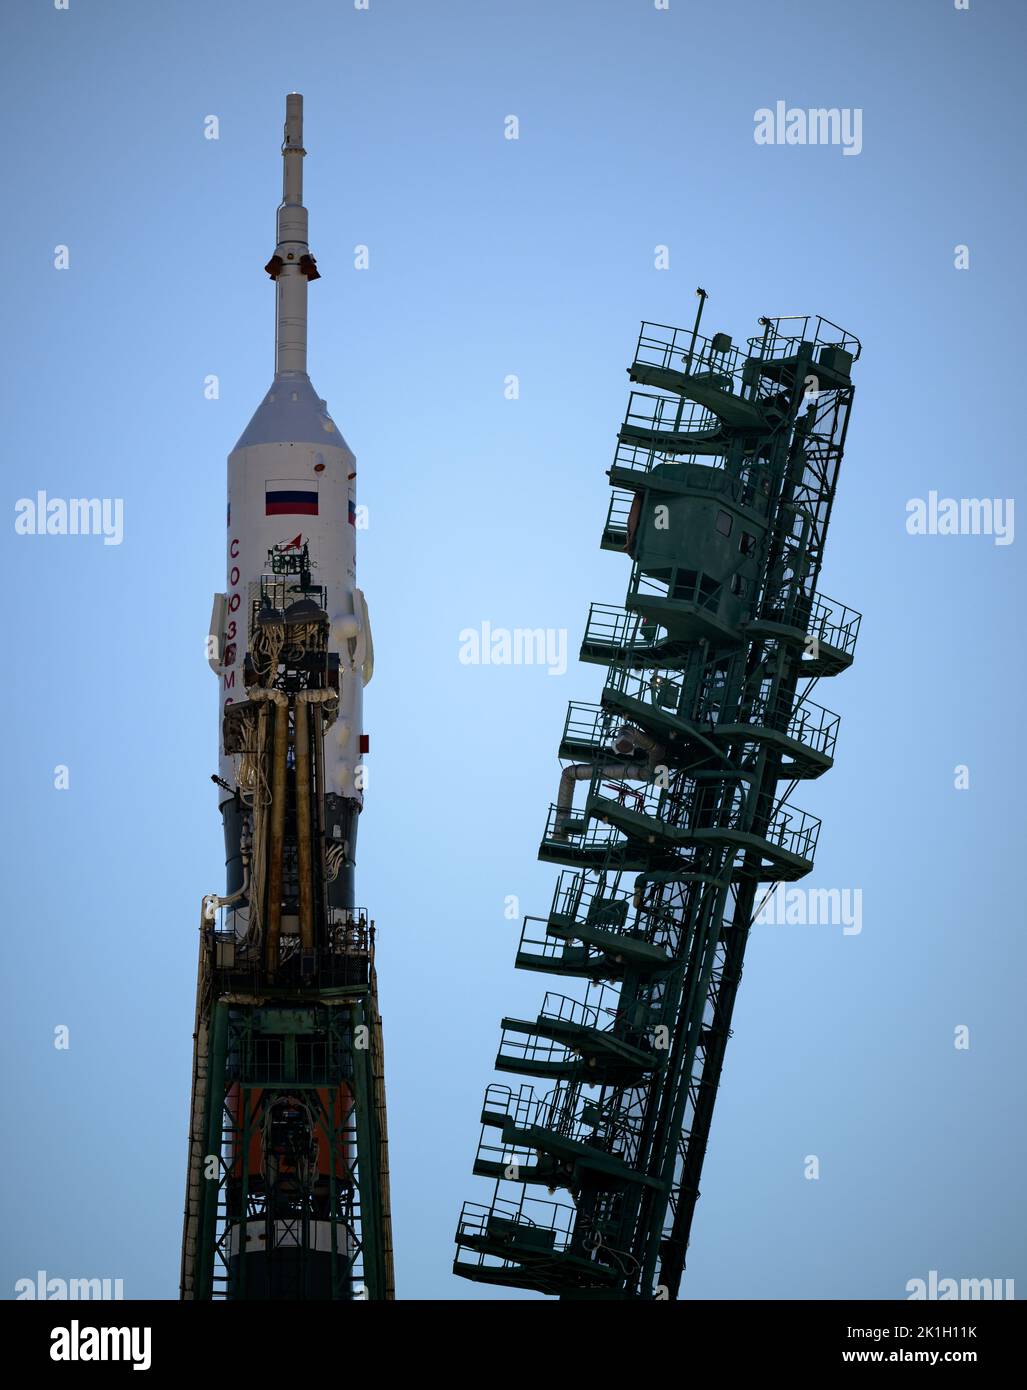 Baikonur, Kazakhstan. 18th Sep, 2022. The service gantry is closed around the Russian Soyuz MS-22 spacecraft and booster rocket at launch pad 31 of the Baikonur Cosmodrome, September 18, 2022 in Baikonur, Kazakhstan. International Space Station Expedition 68 crew members astronaut Frank Rubio of NASA, and cosmonauts Sergey Prokopyev and Dmitri Petelin of Roscosmos are set to launch September 21st to the orbiting laboratory. Credit: Bill Ingalls/NASA/Alamy Live News Stock Photo